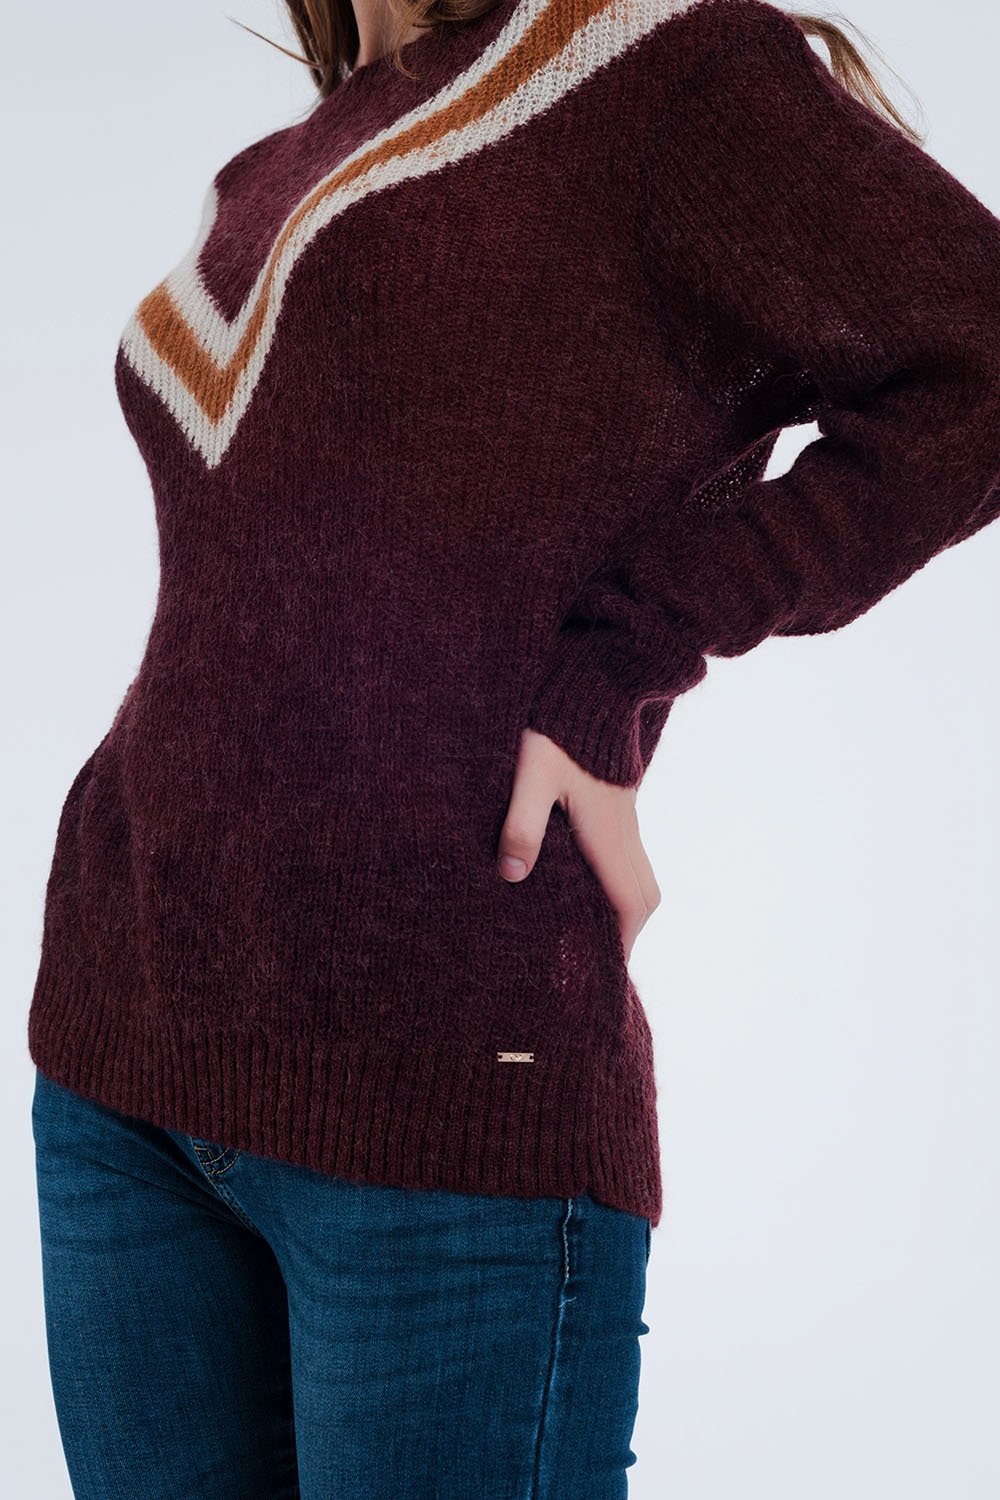 Maroon Sweater With Striped Detail